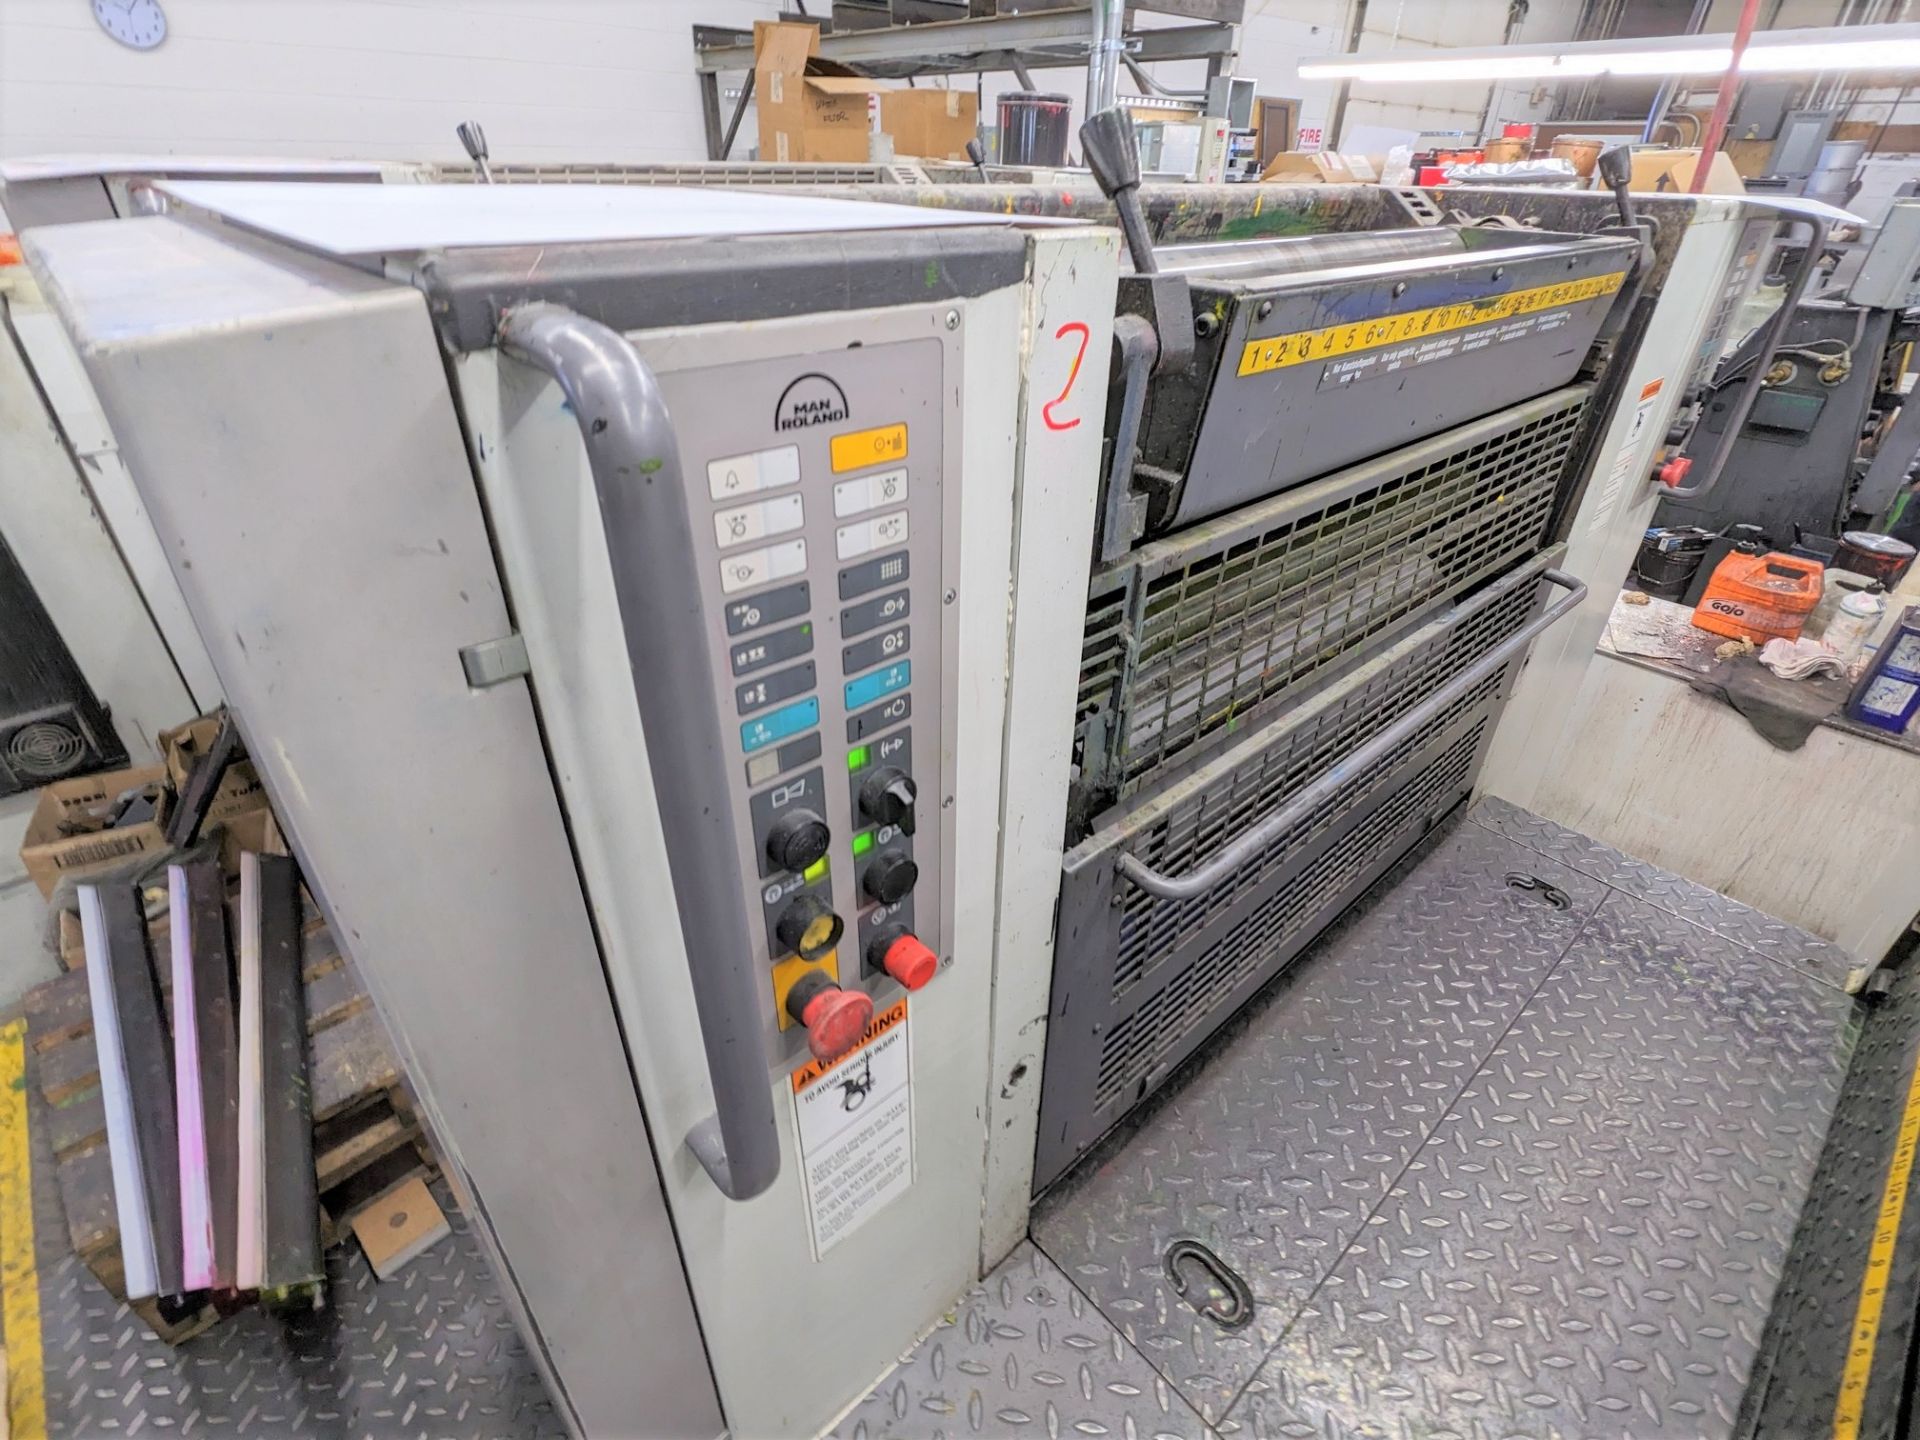 1995 MAN ROLAND 300 6-COLOUR OFFSET PRINTING PRESS, MODEL R306, S/N 25152B, TOTAL SHEET COUNT - Image 20 of 53